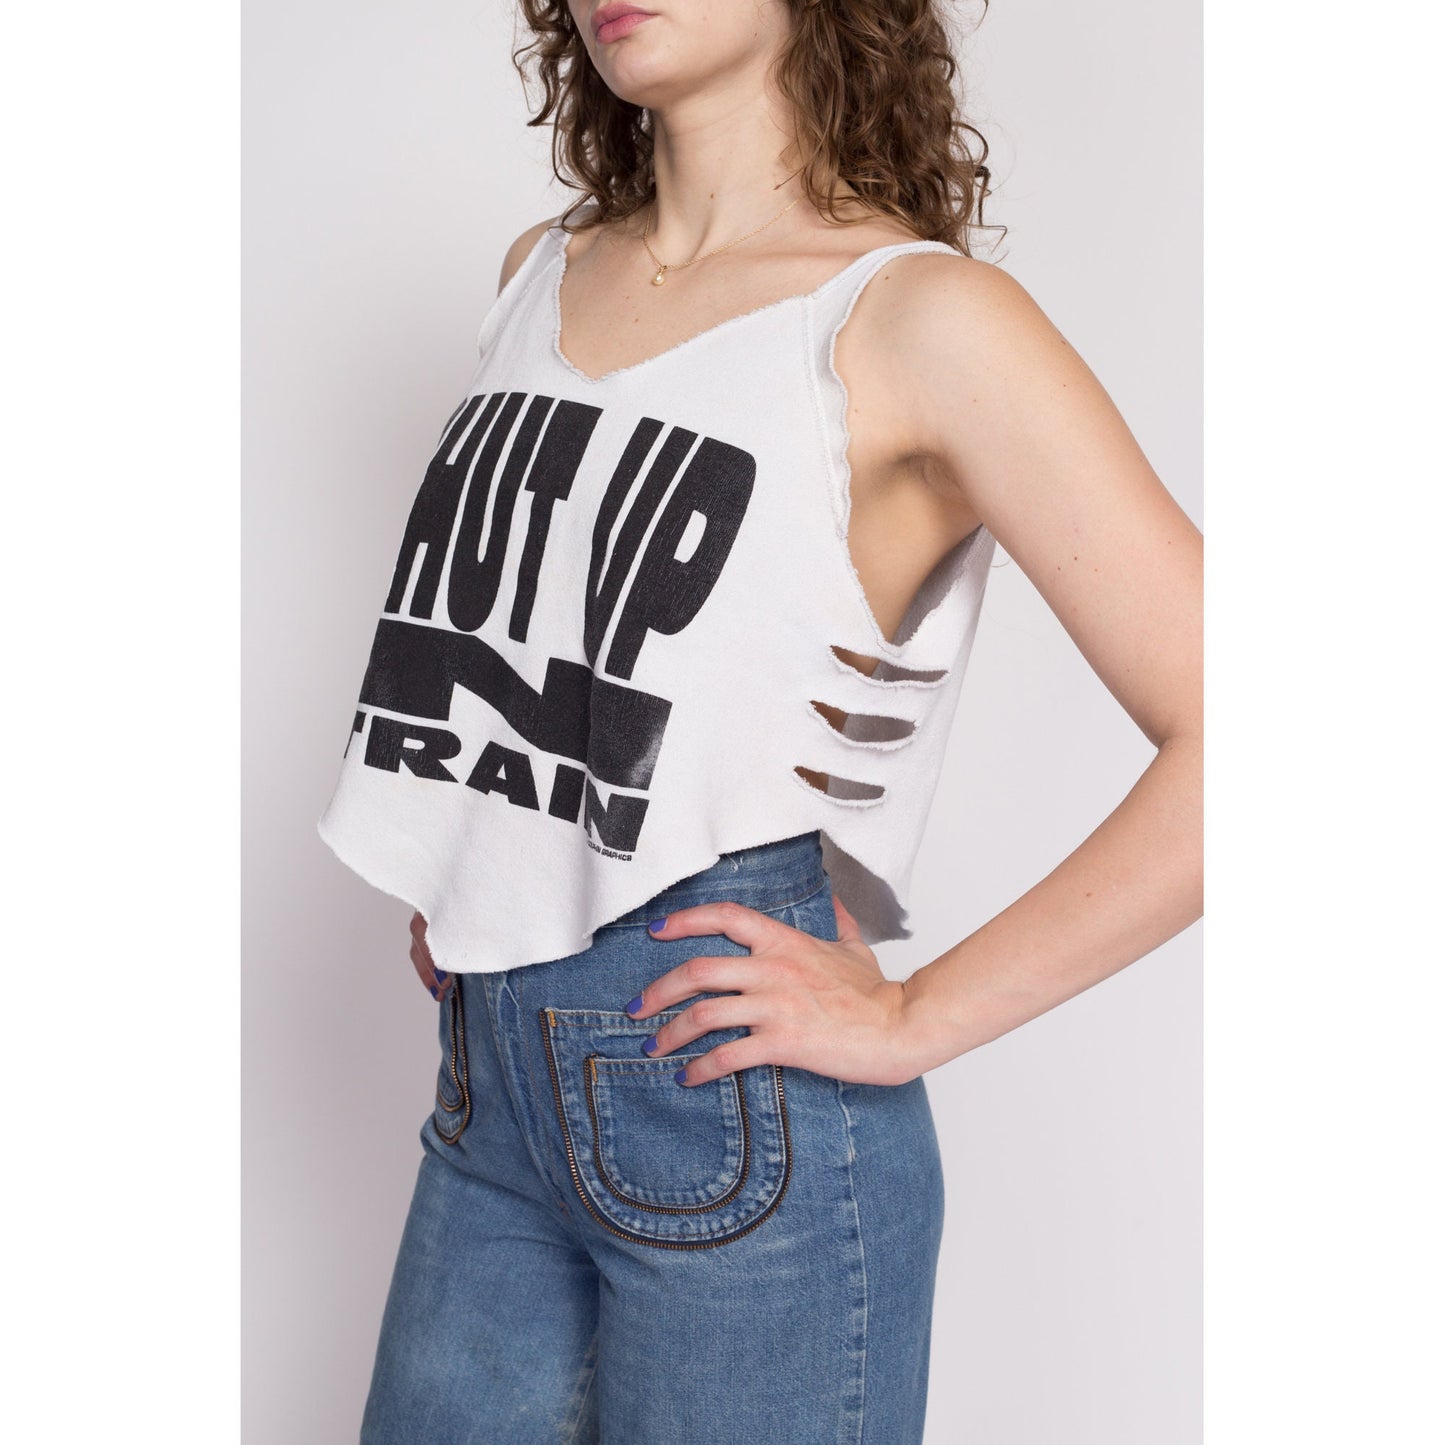 L| 80s "Shut Up N Train" Cropped Workout Tank - Large | Vintage Cut Off Reworked Sweatshirt Cut Out Crop Top